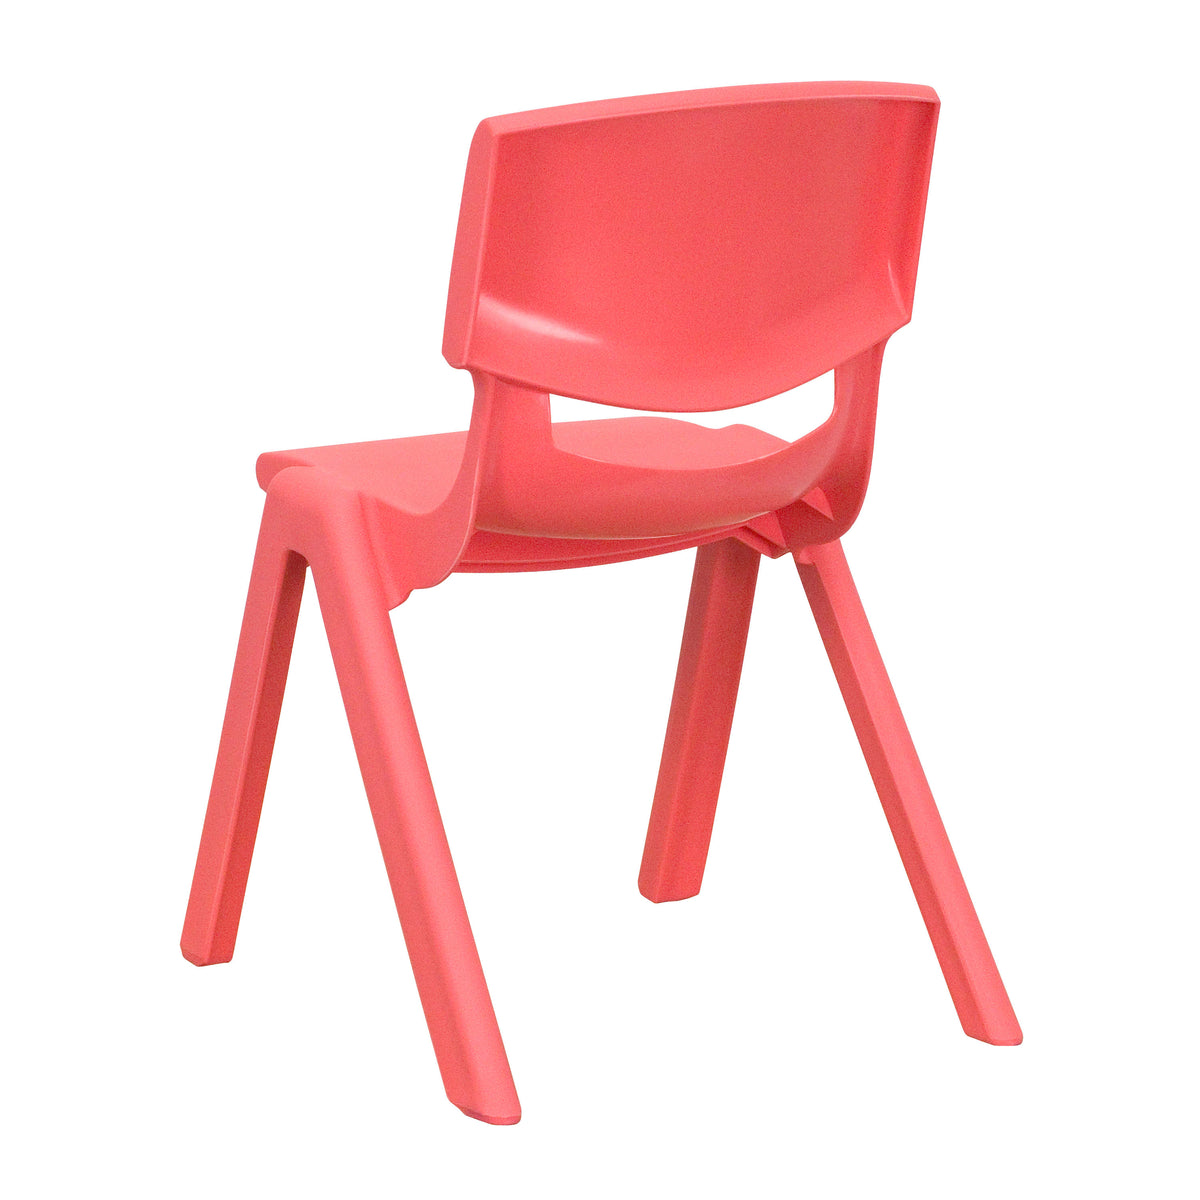 Red |#| 4 Pack Red Plastic Stack School Chair with 12inch Seat Height - Kids Chair